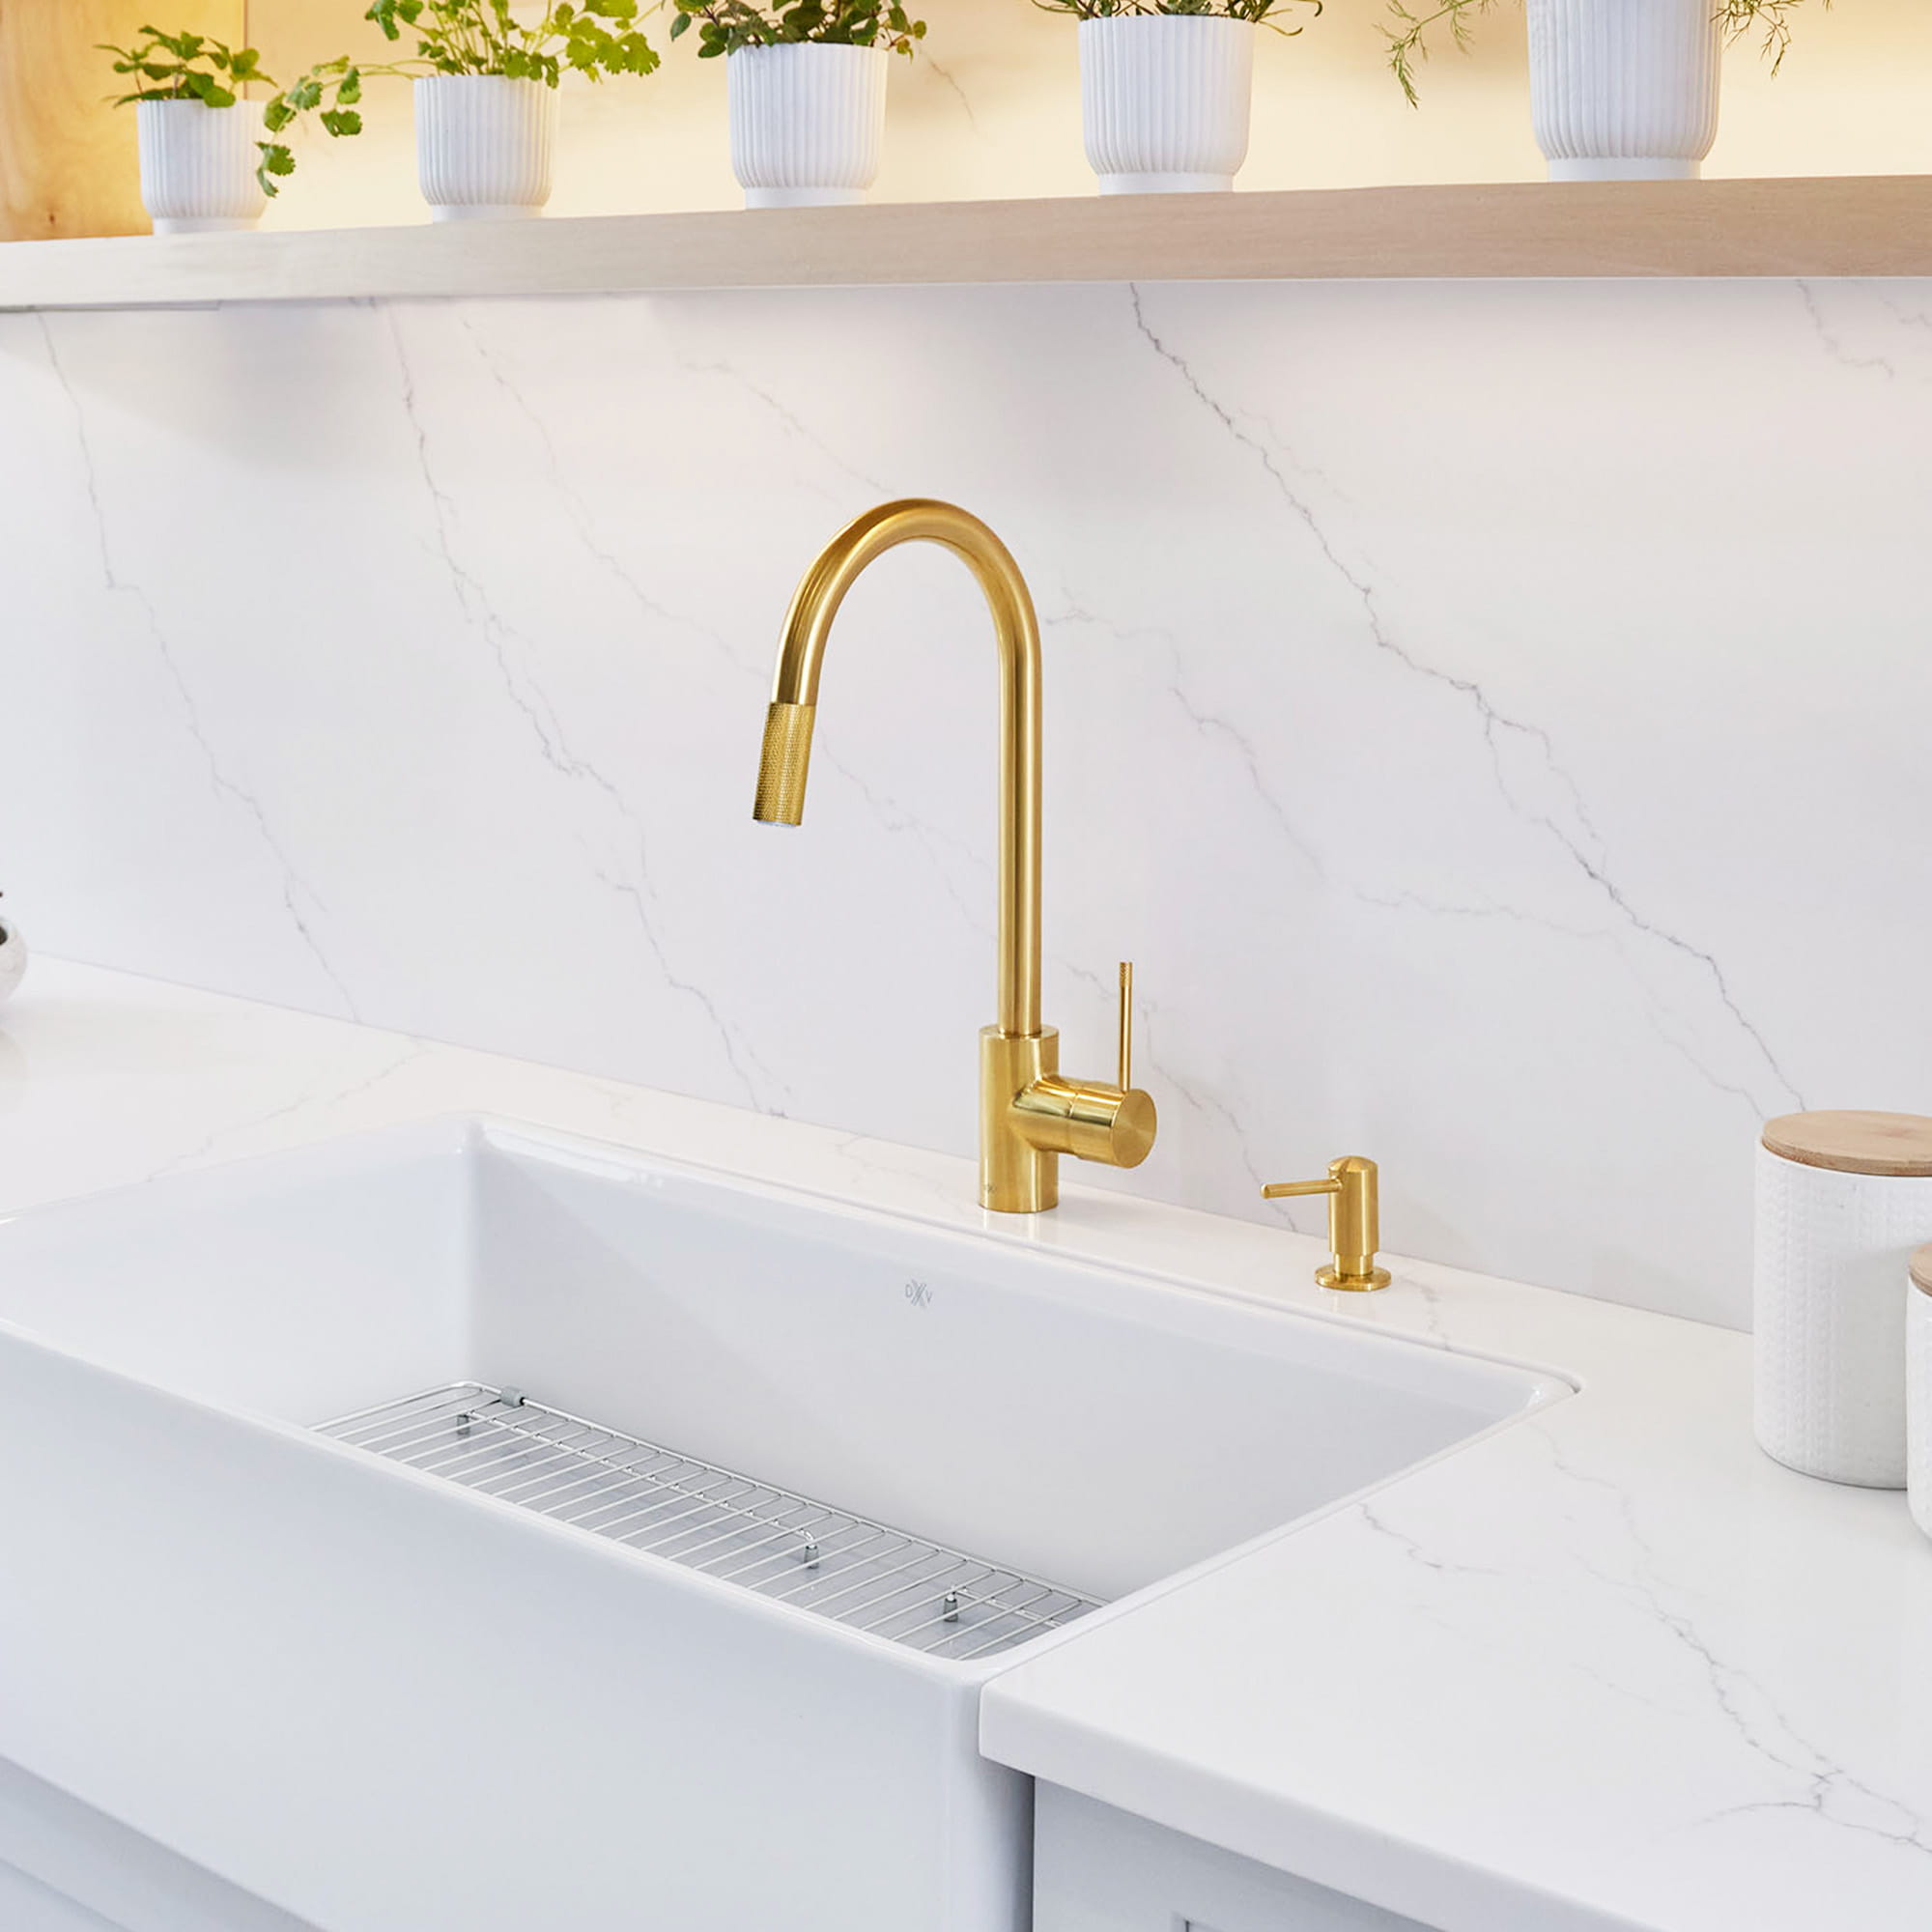 Etre Kitchen Faucet Collection from DXV